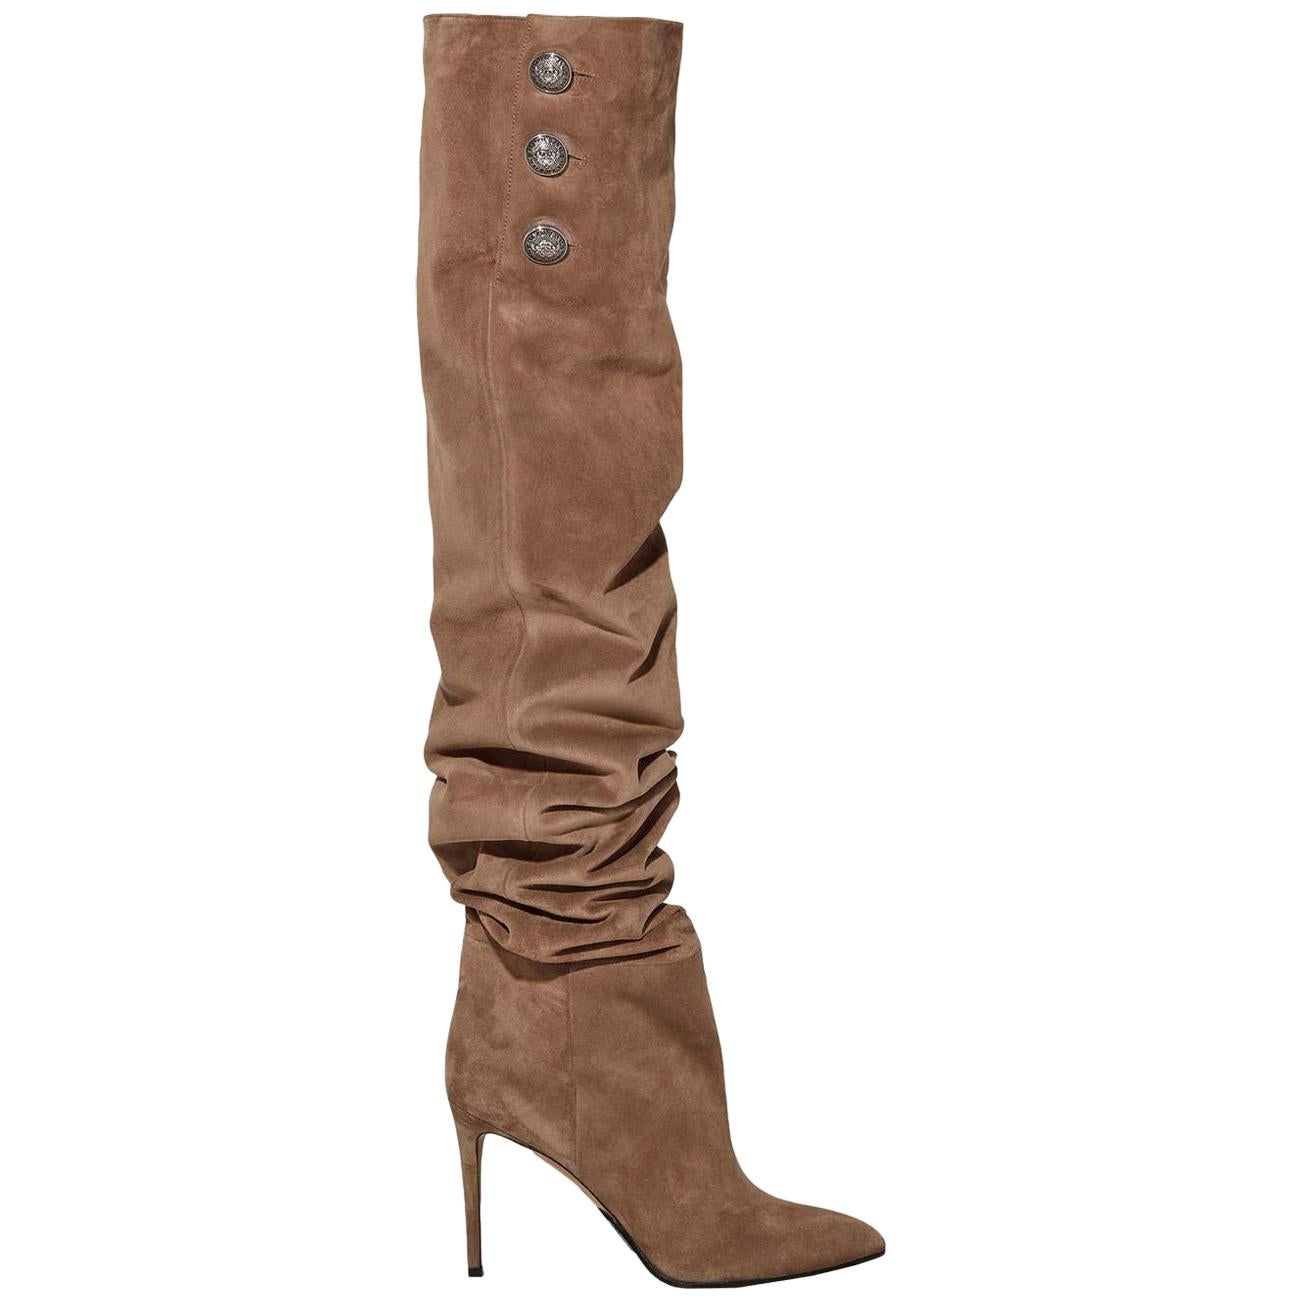 Balmain Janet Button Embellished Suede Thigh High Boots